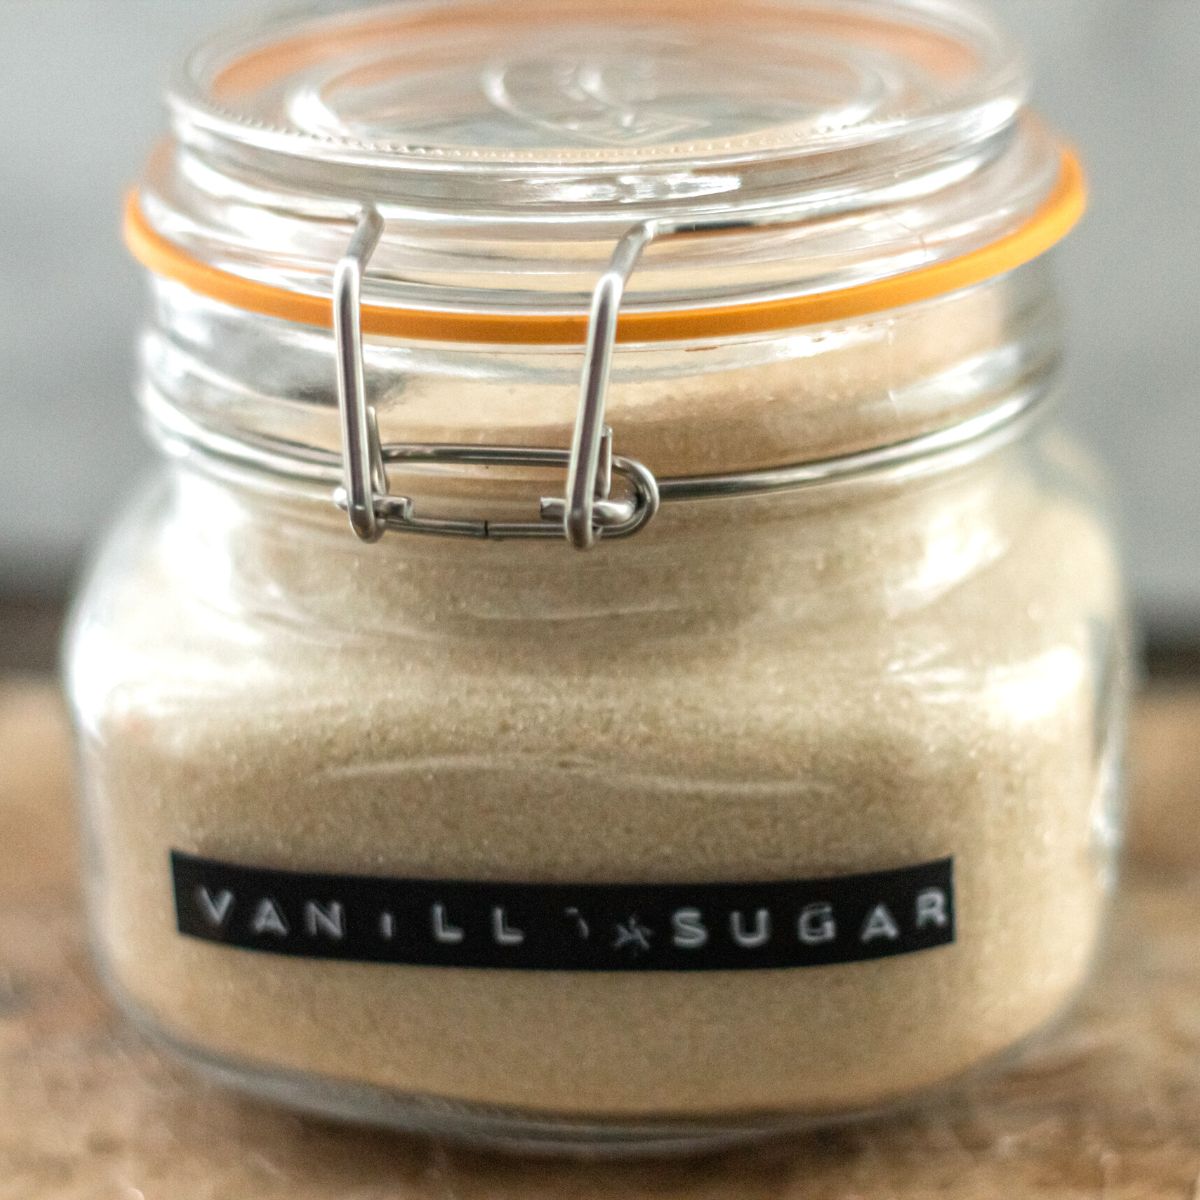 Vanilla Sugar – A quick, simple and lovely edible gift